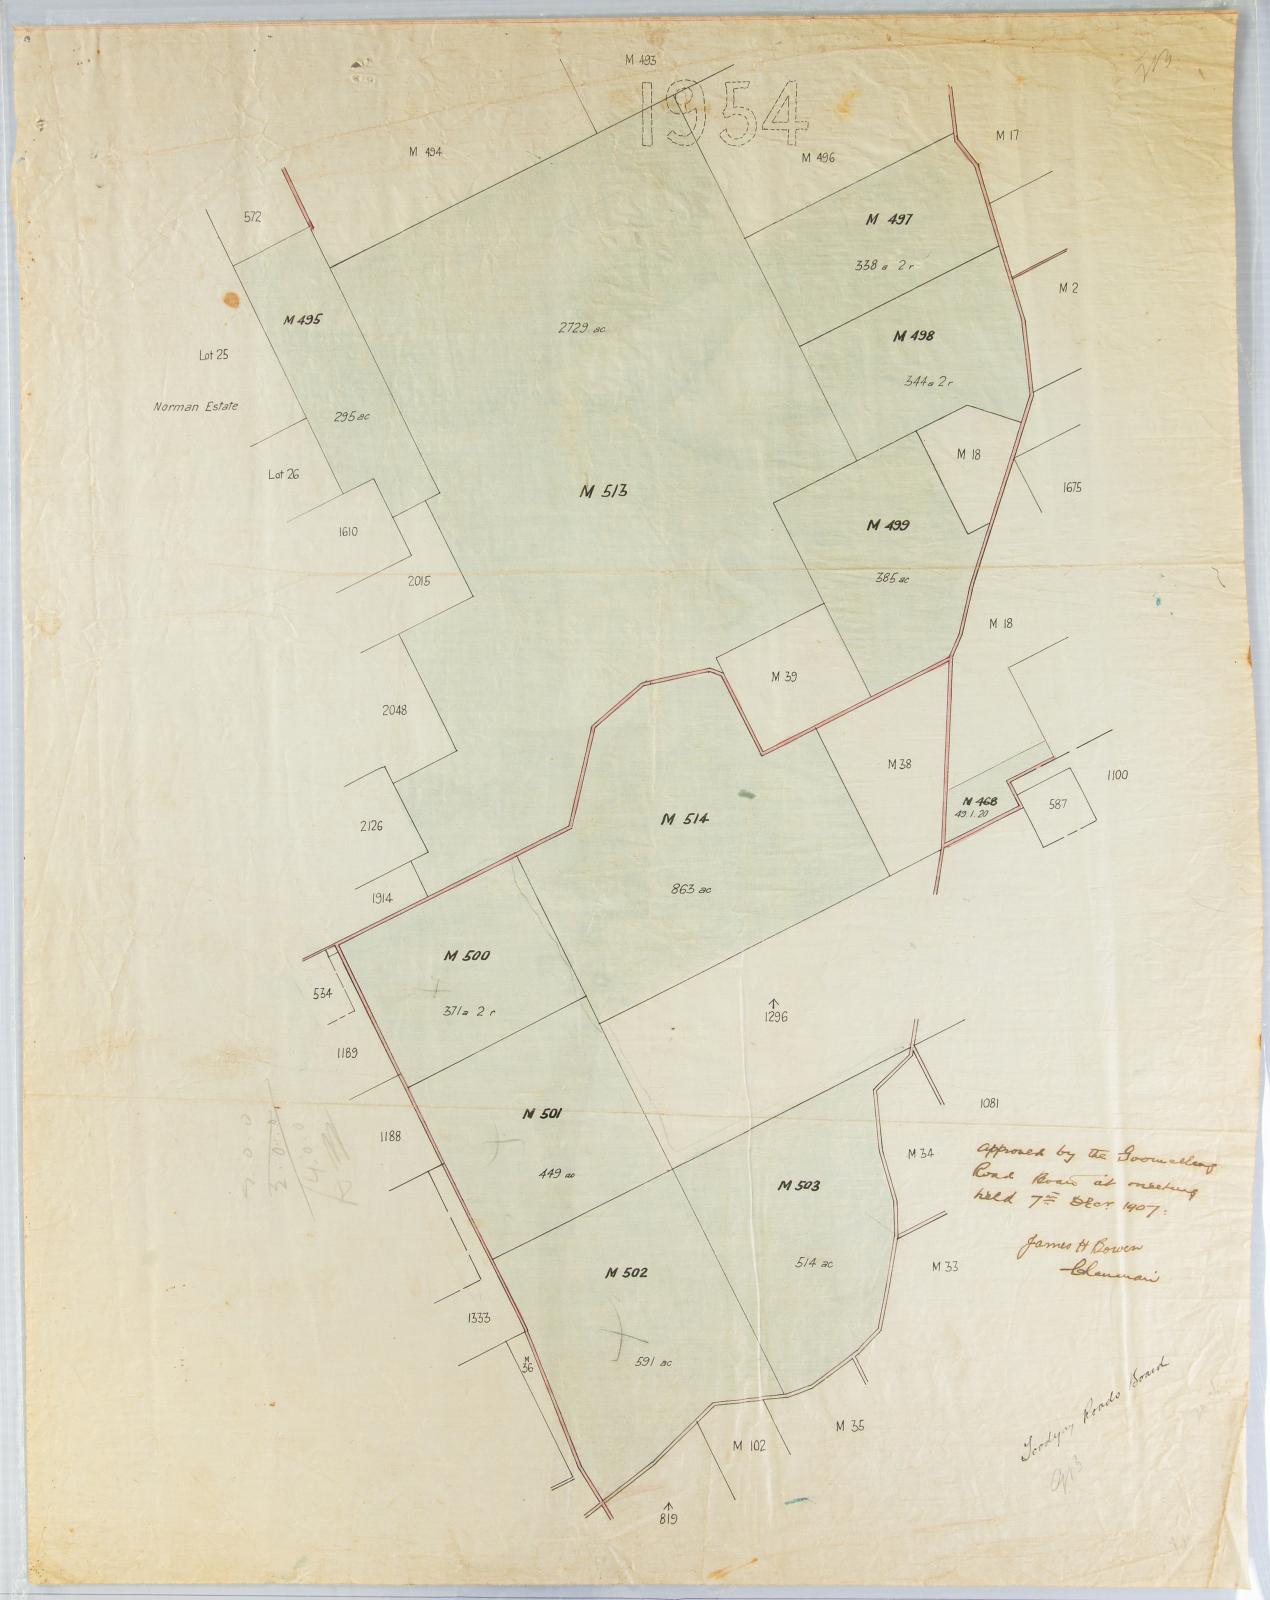 Plan of subdivision approved by Goomalling Road Board 1907